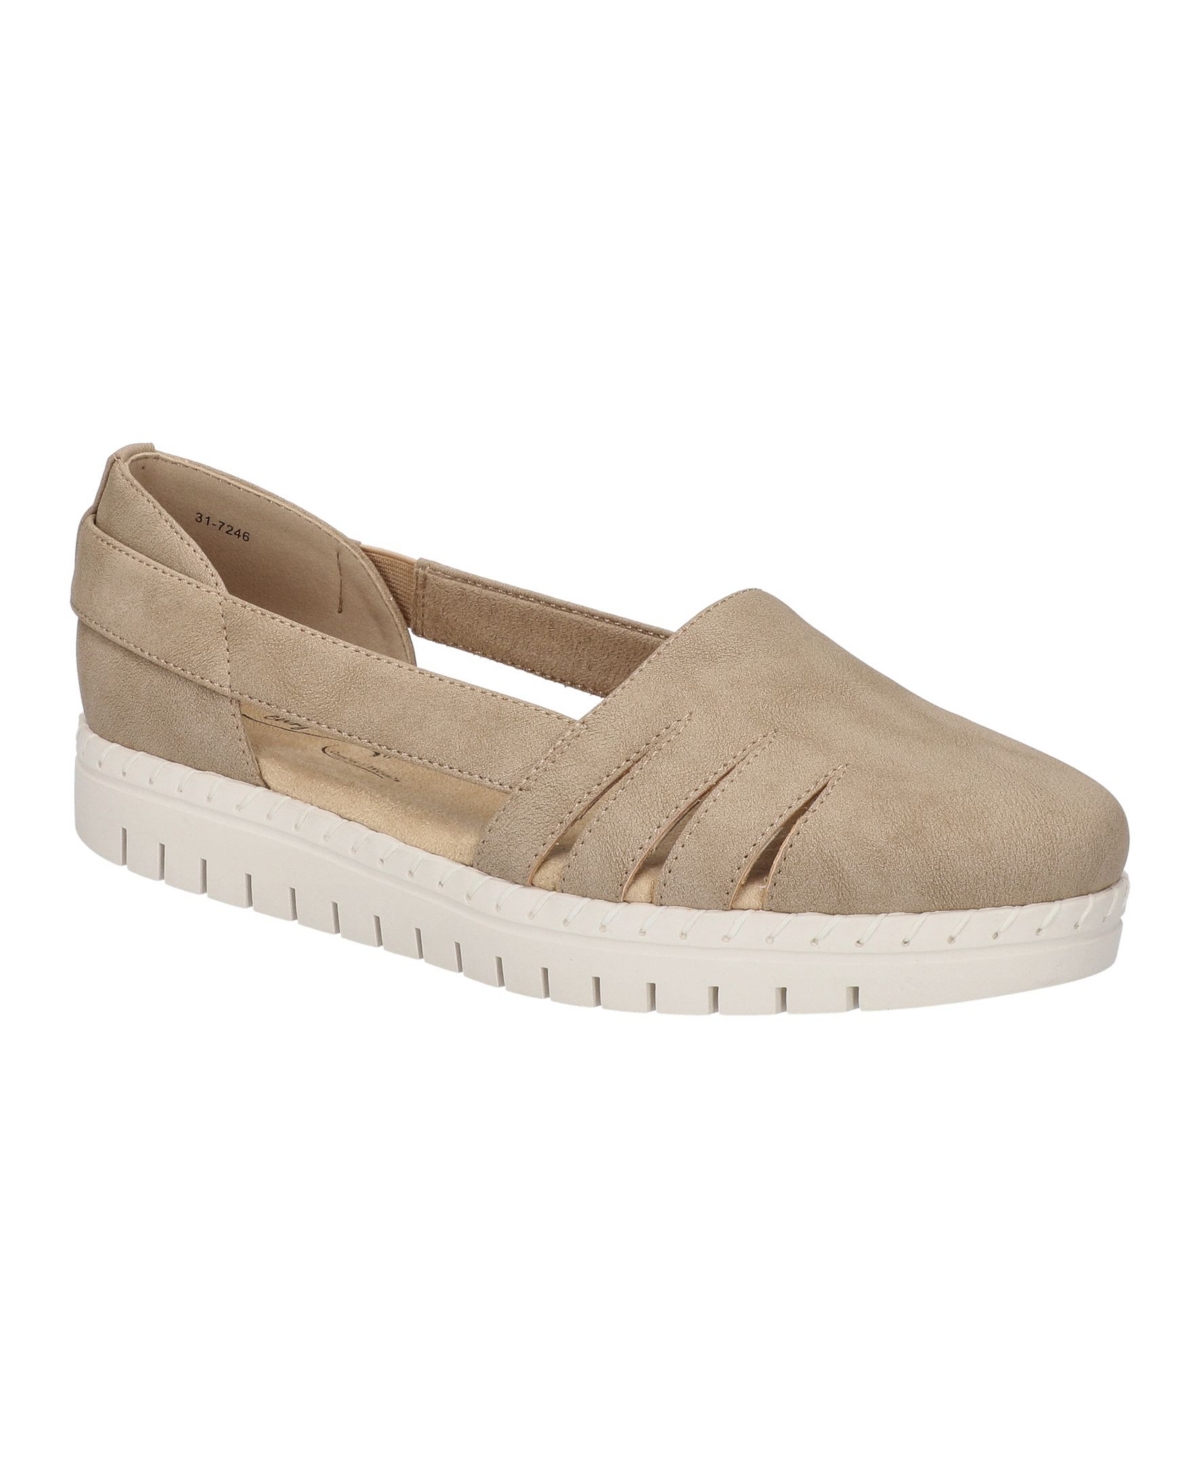 Women's Bugsy Comfort Slip-on Flats - Natural